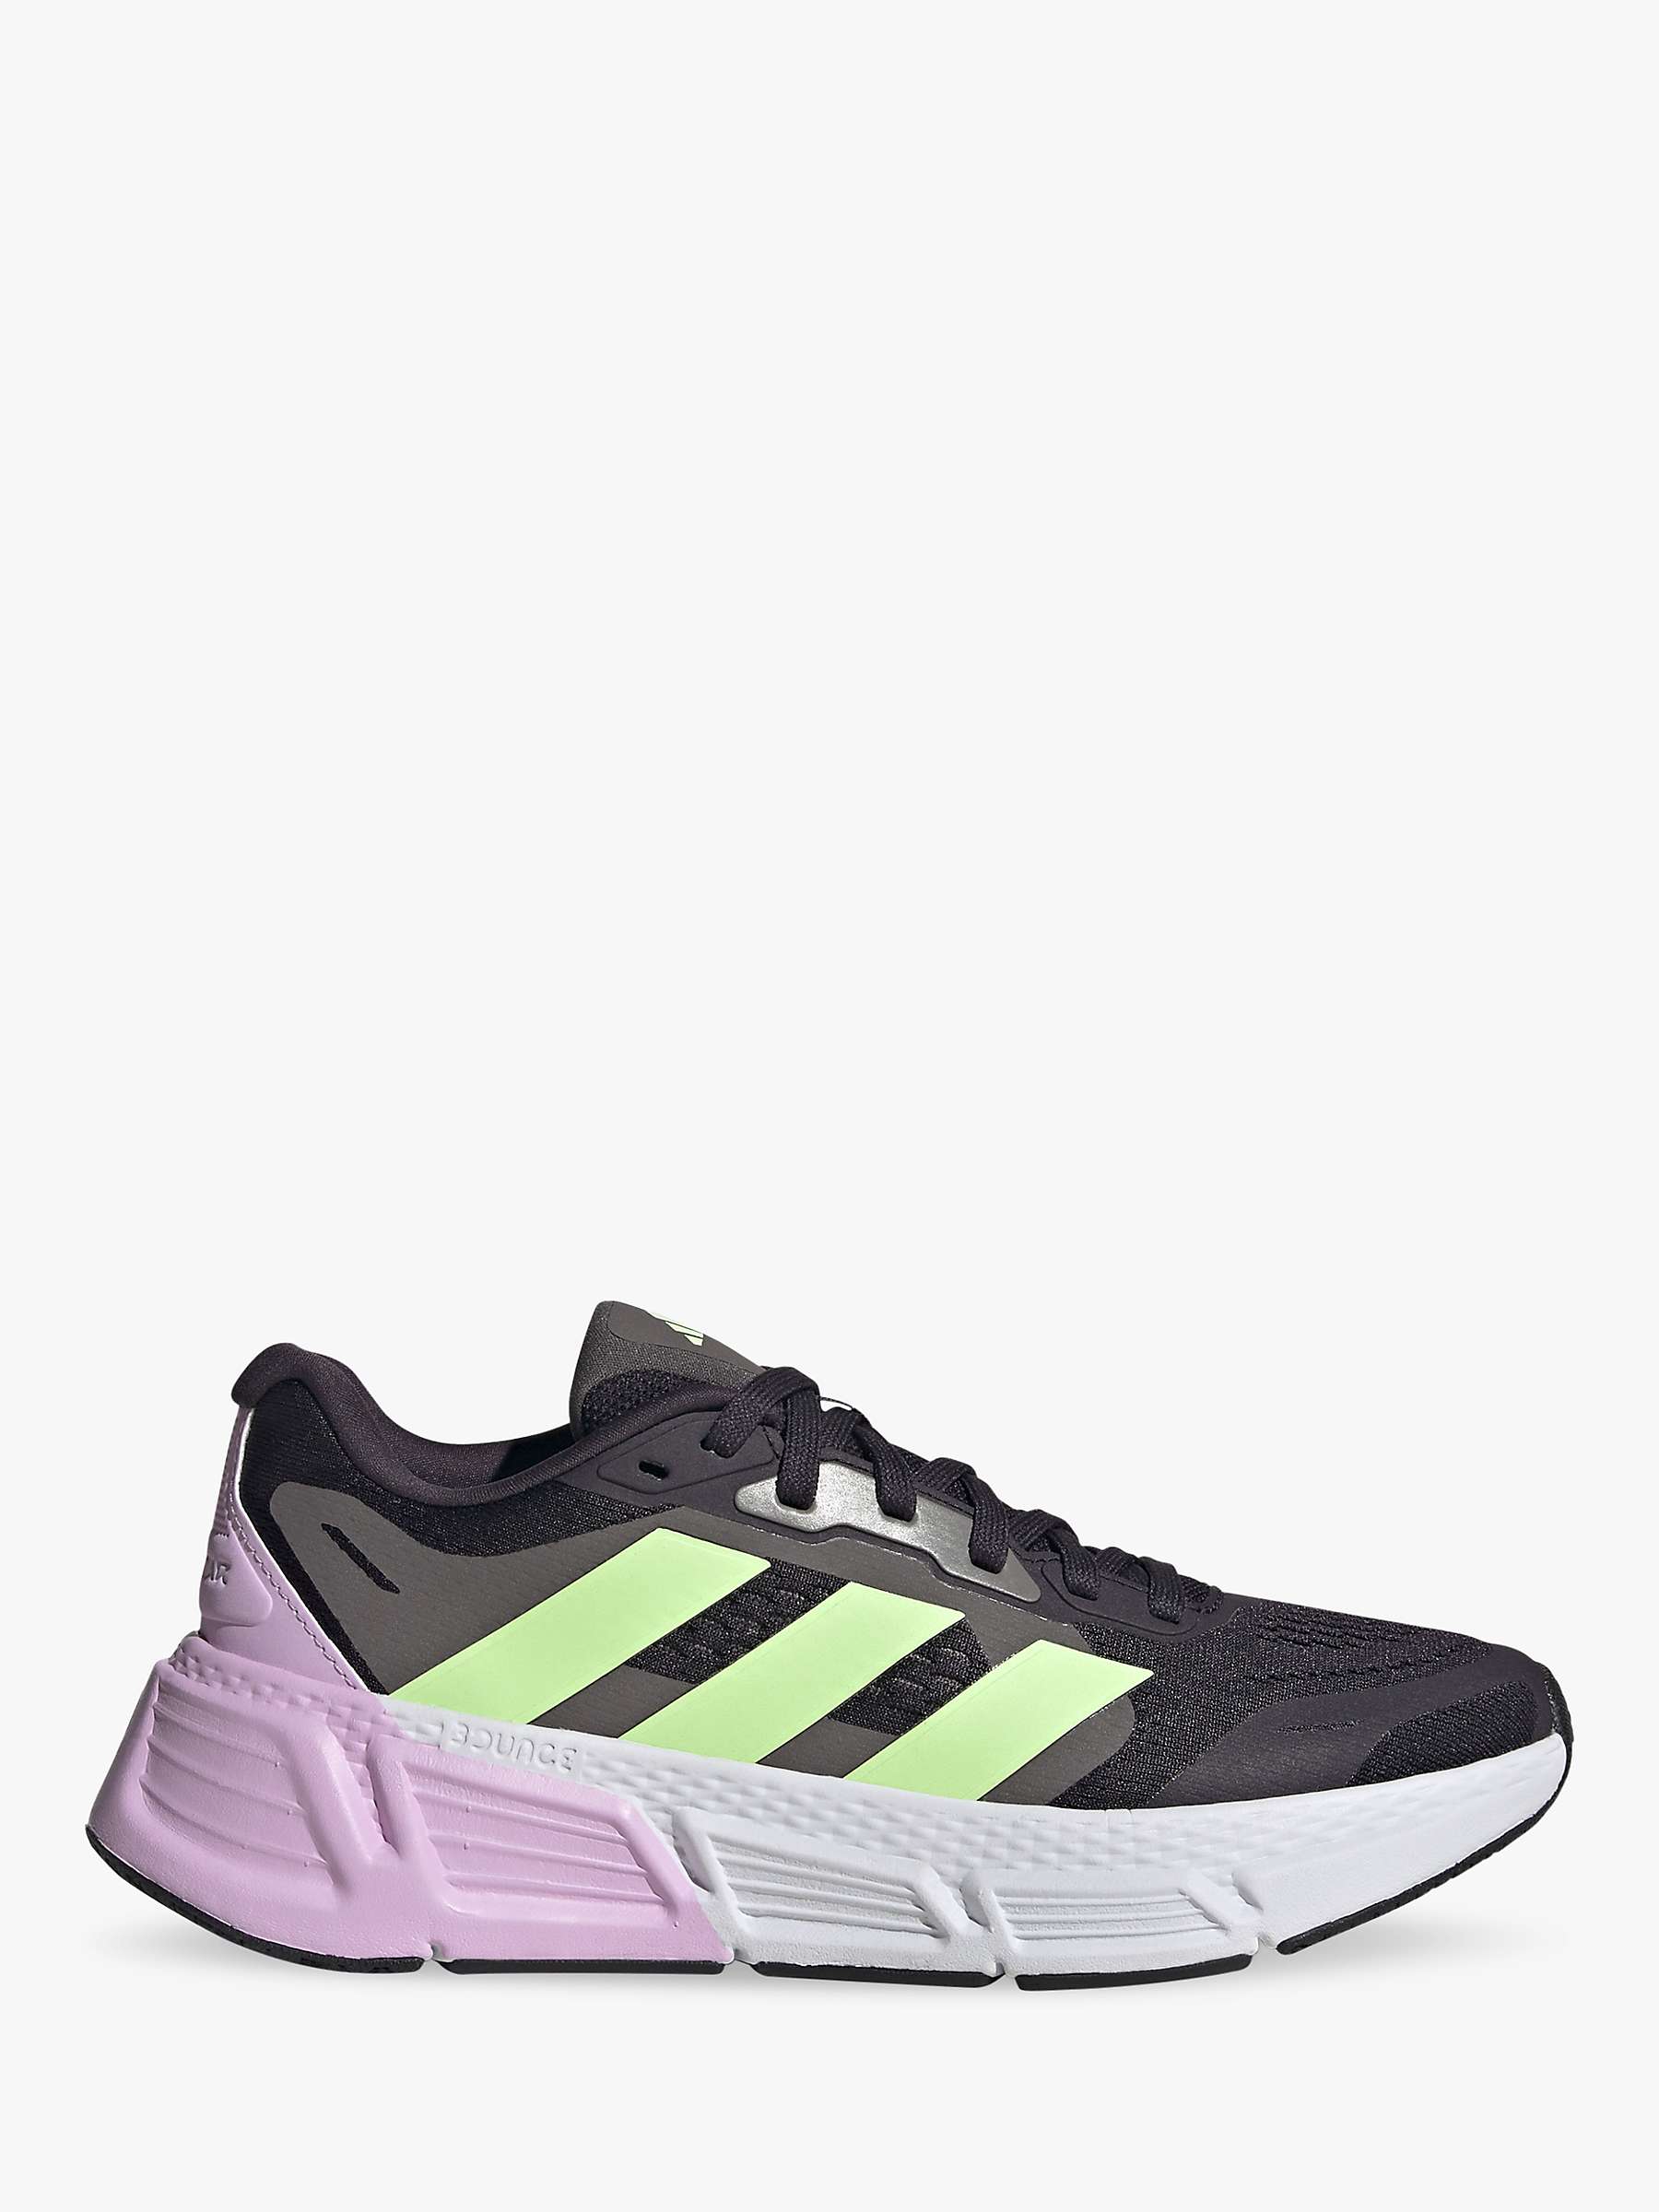 Buy adidas Questar 2 Bounce Women's Running Shoes Online at johnlewis.com